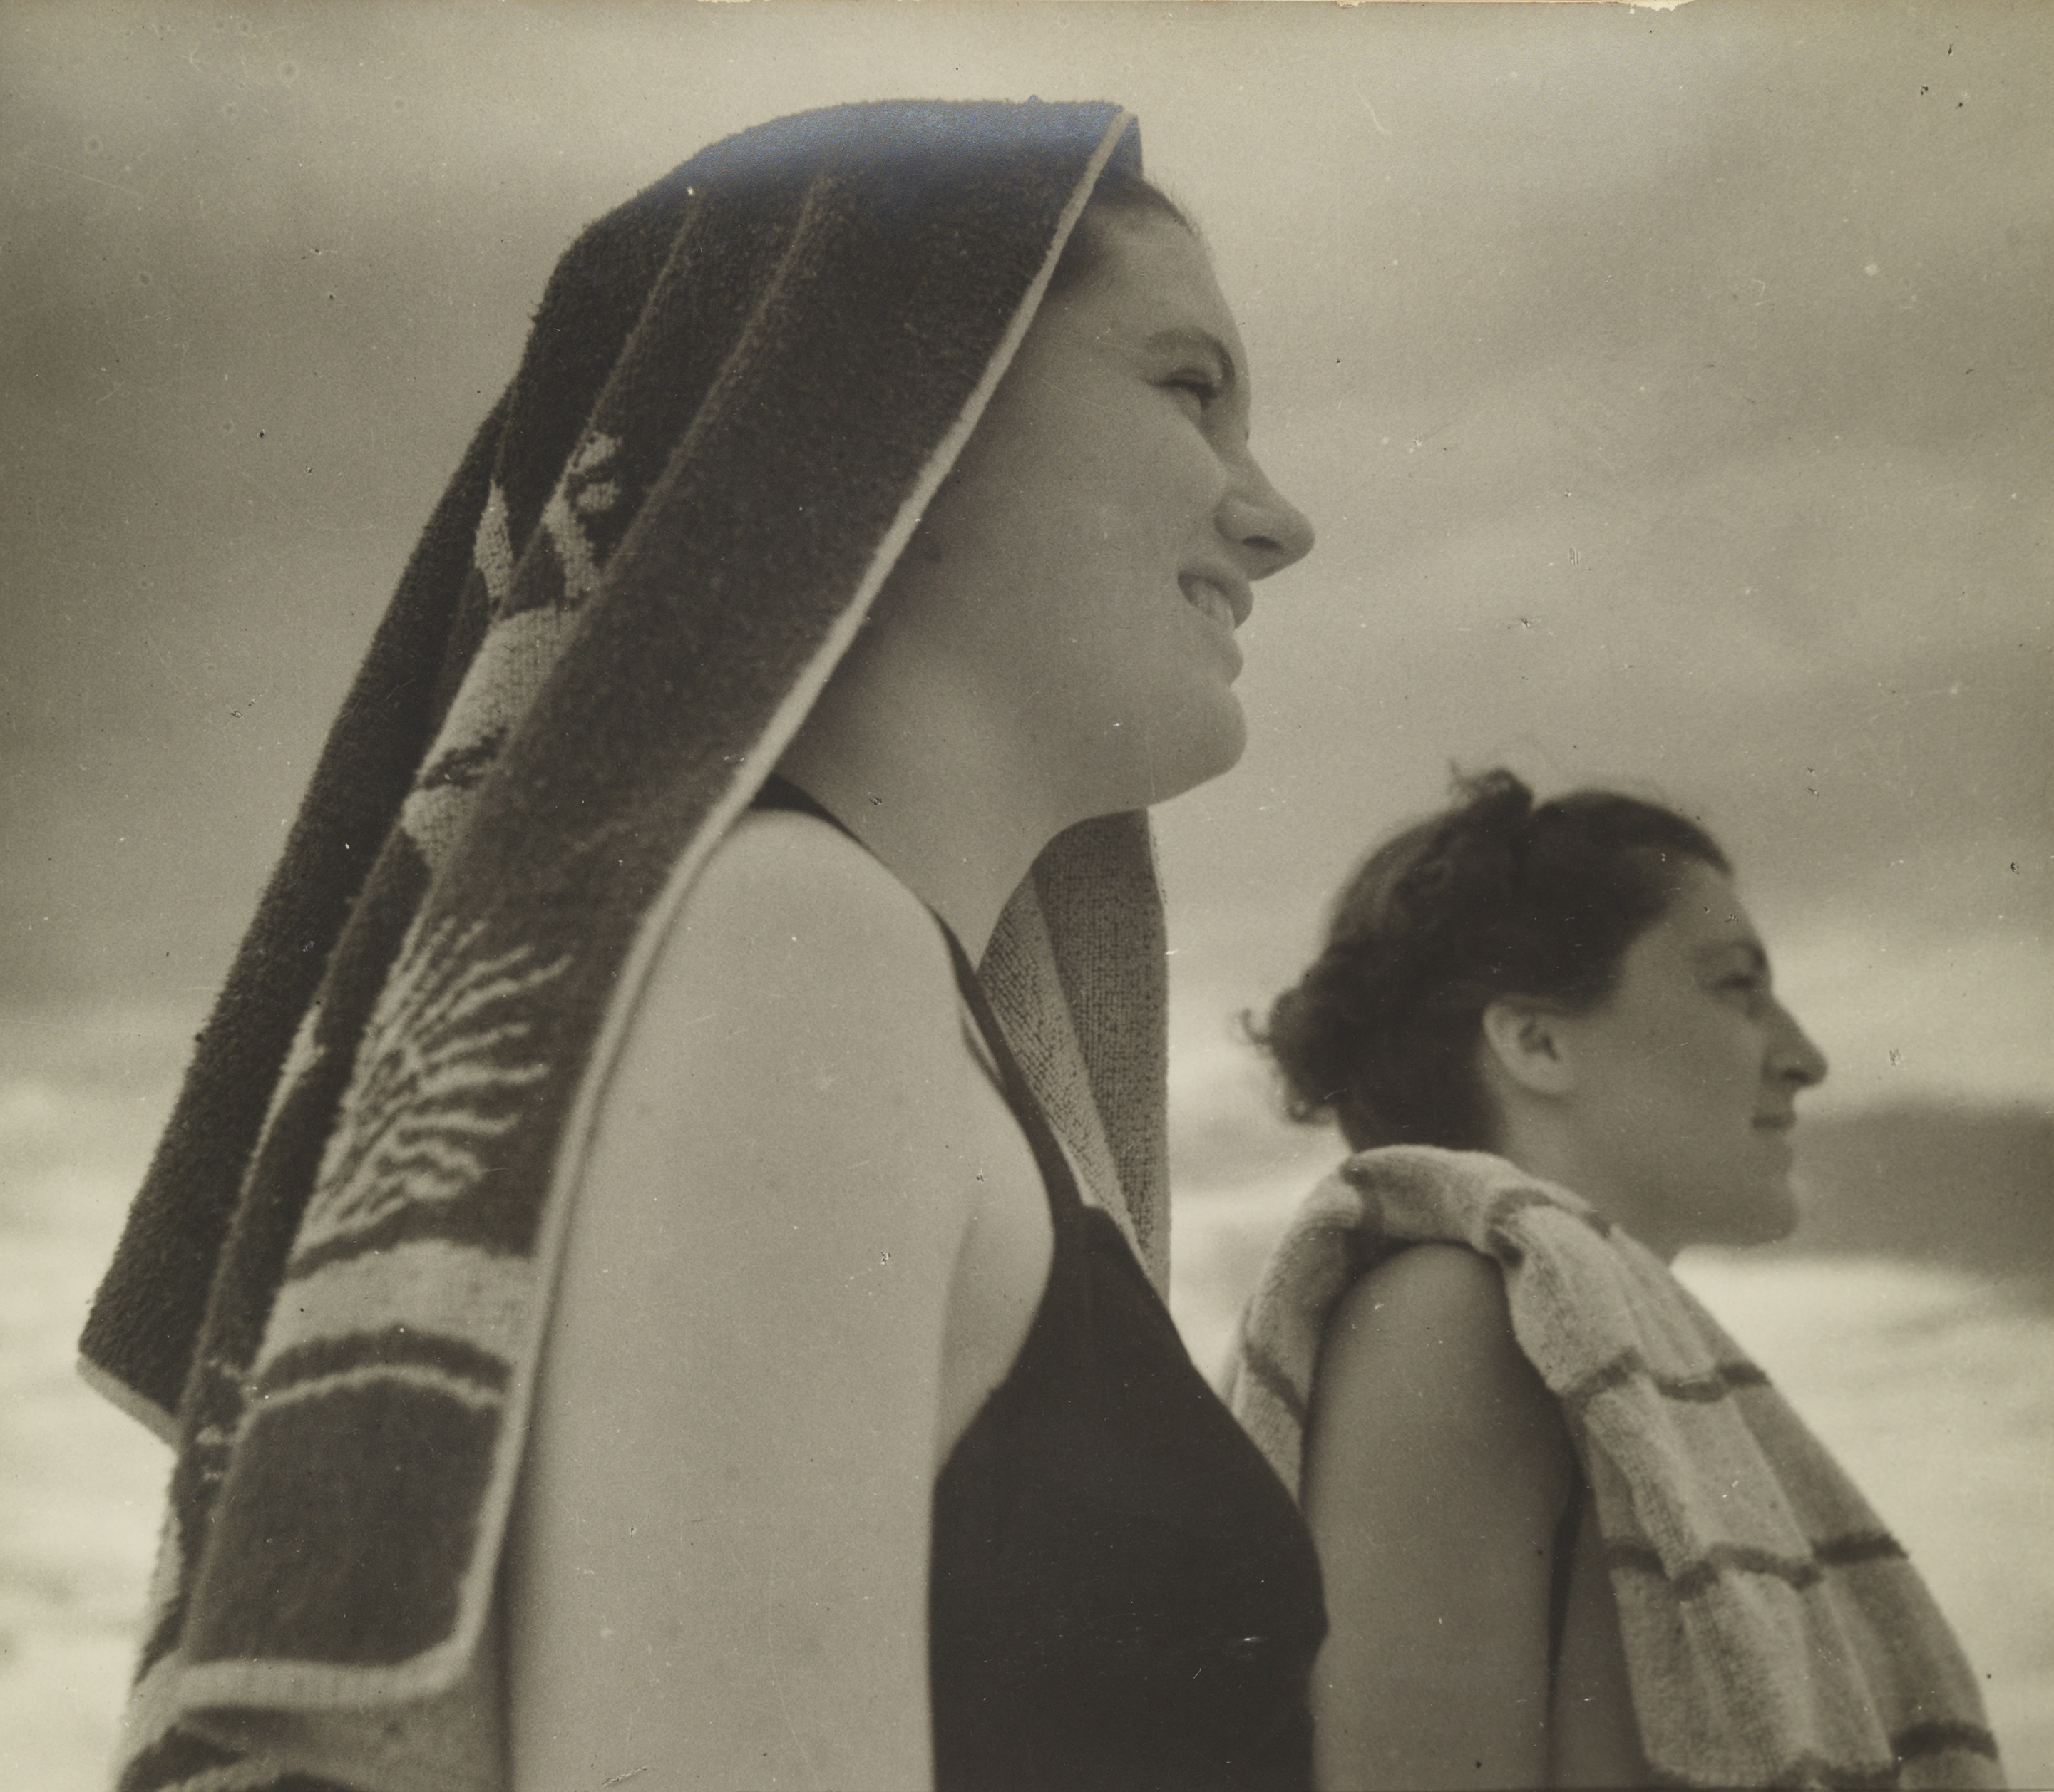 A sepia photograph of two women standing side by side in profile. The woman in the foreground has beach towel draped over her head.